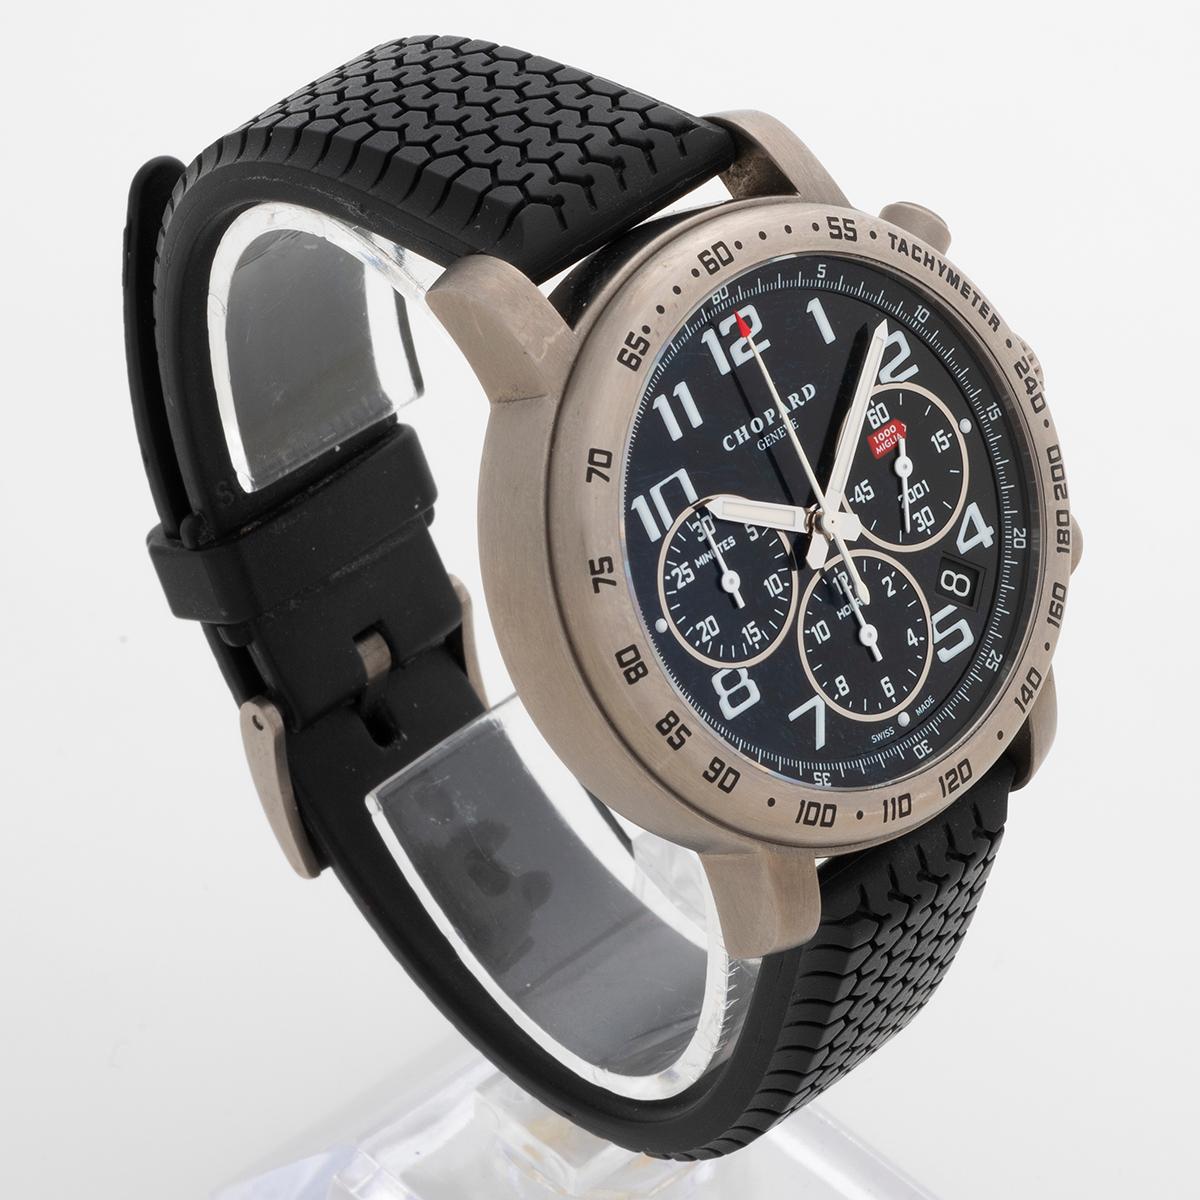 Our very rare Chopard Mille Miglia chronograph with date , reference 8915, features a titanium 40mm case with sapphire glass caseback and rubber Dunlop tyre strap with tang buckle. This particular example is a competitors watch, given or eligible to